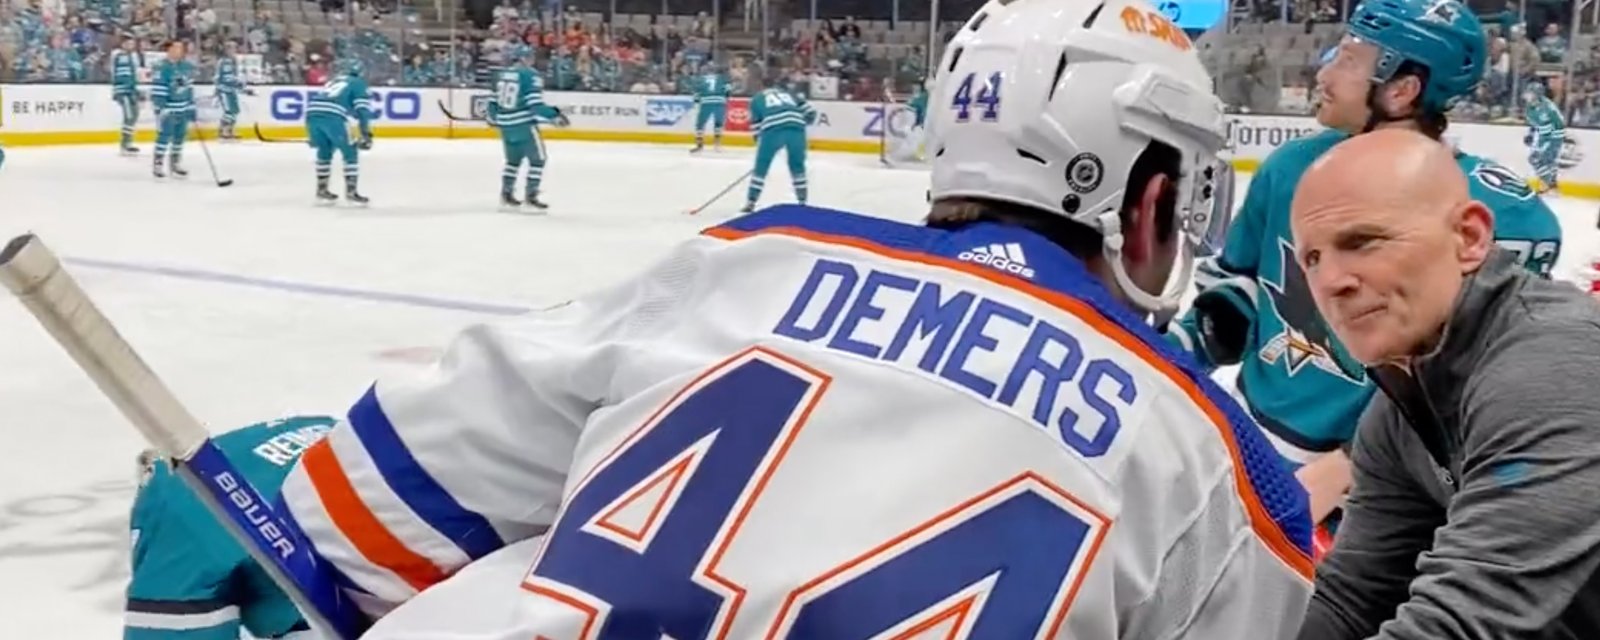 Former NHL defenseman Jason Demers gets identity stolen and signed to a contract!